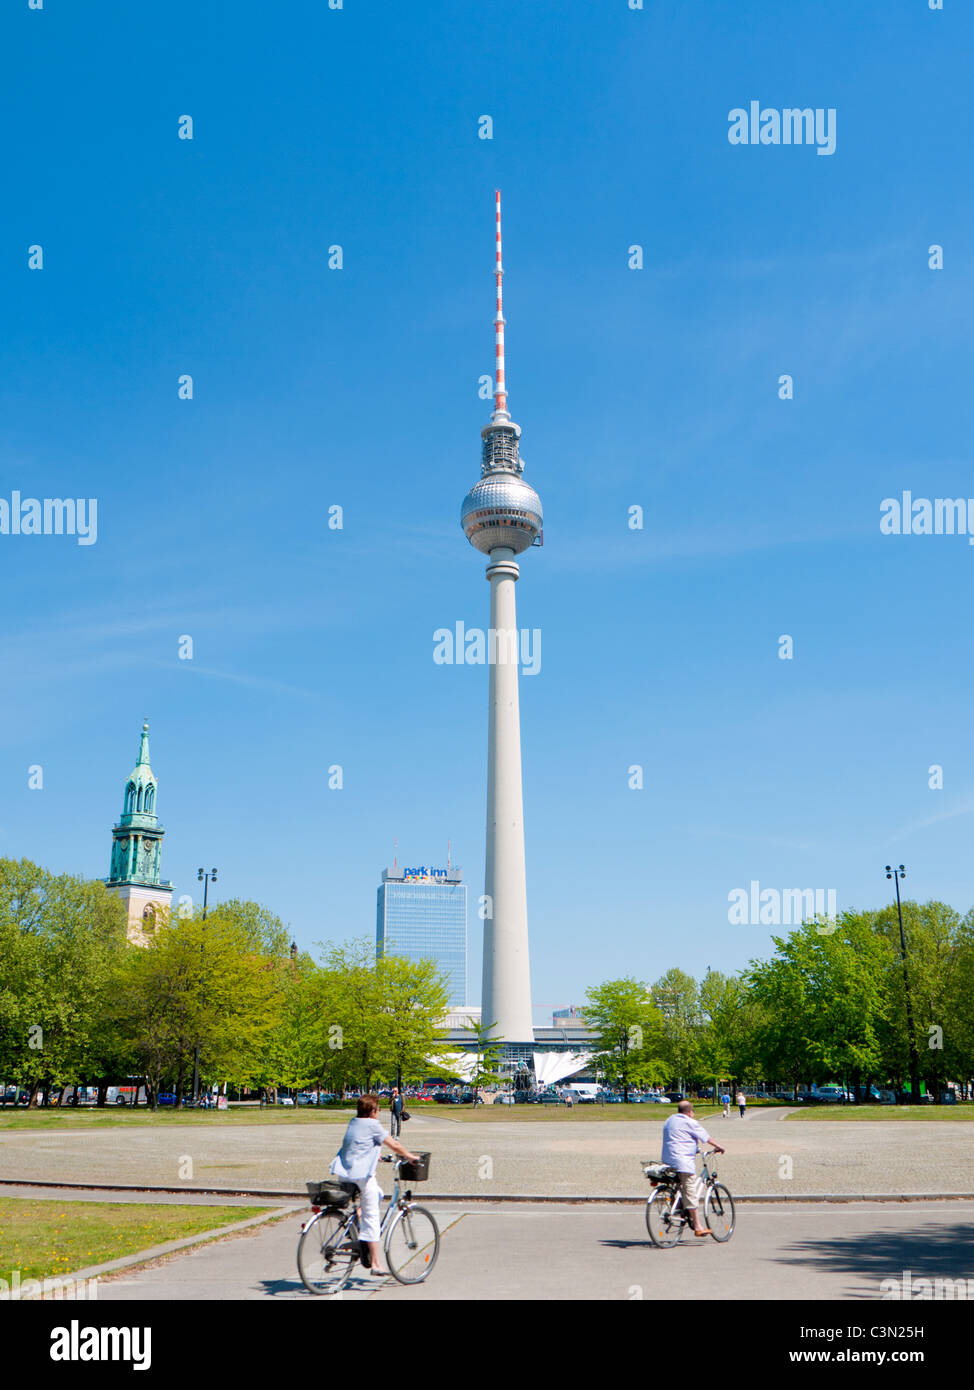 View of TV Tower or Fernsehturm in Mitte district of Berlin Germany Stock Photo